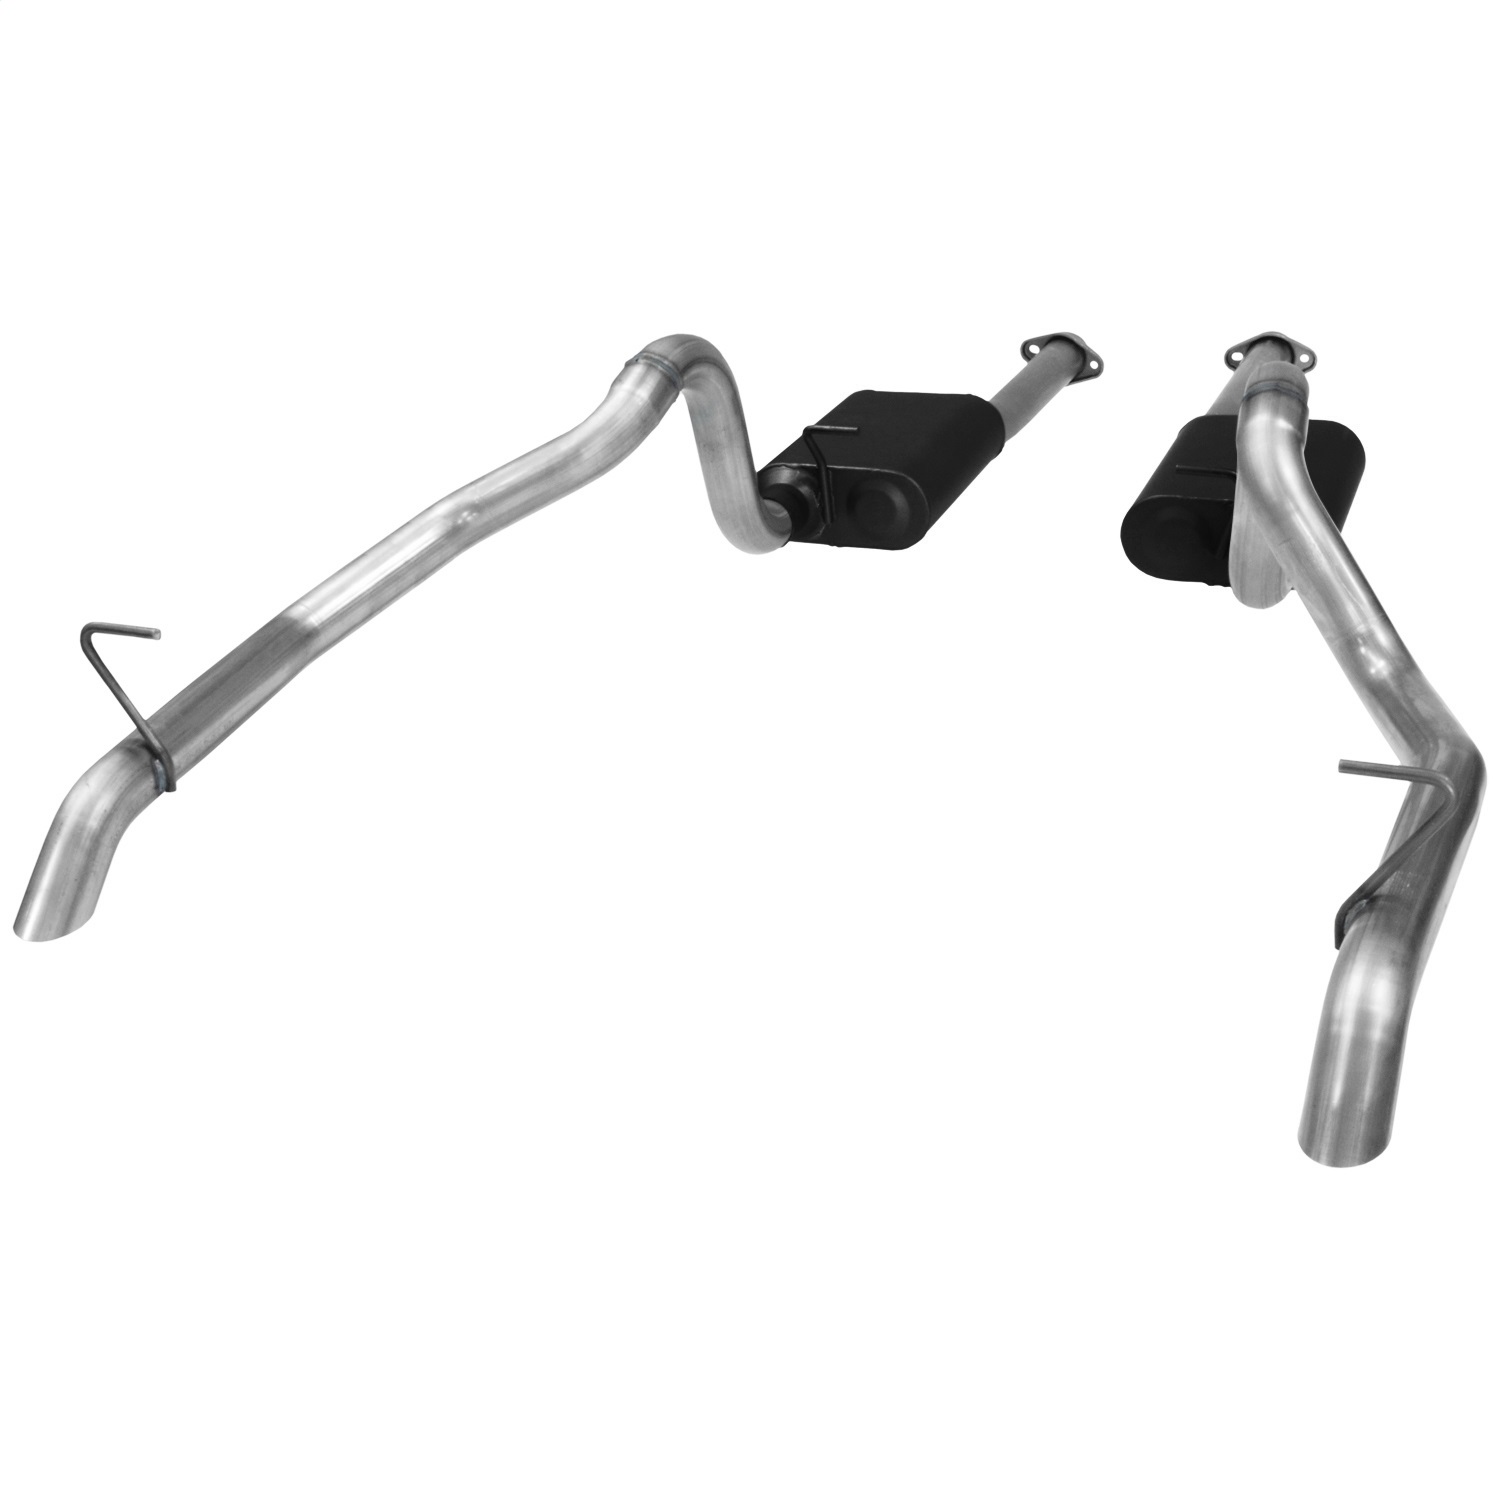 Flowmaster 817116 American Thunder Cat Back Exhaust System Fits 87-93 Mustang